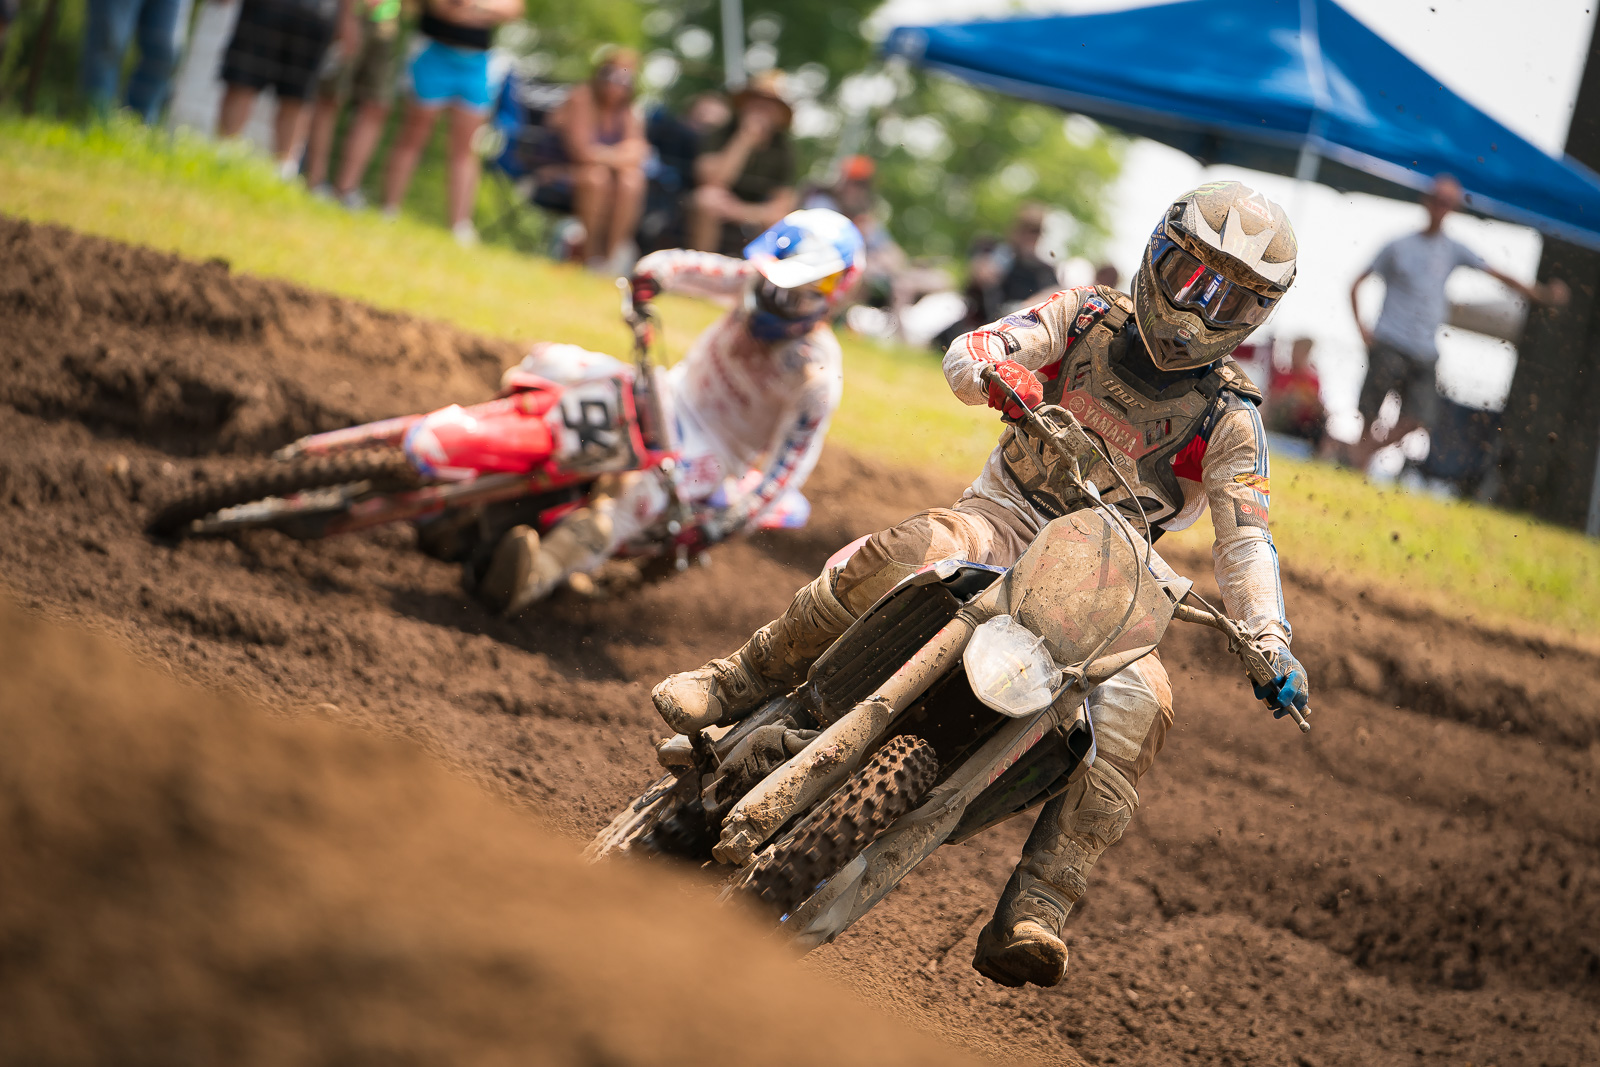 2021 RedBud Motocross Race Highlights and Results